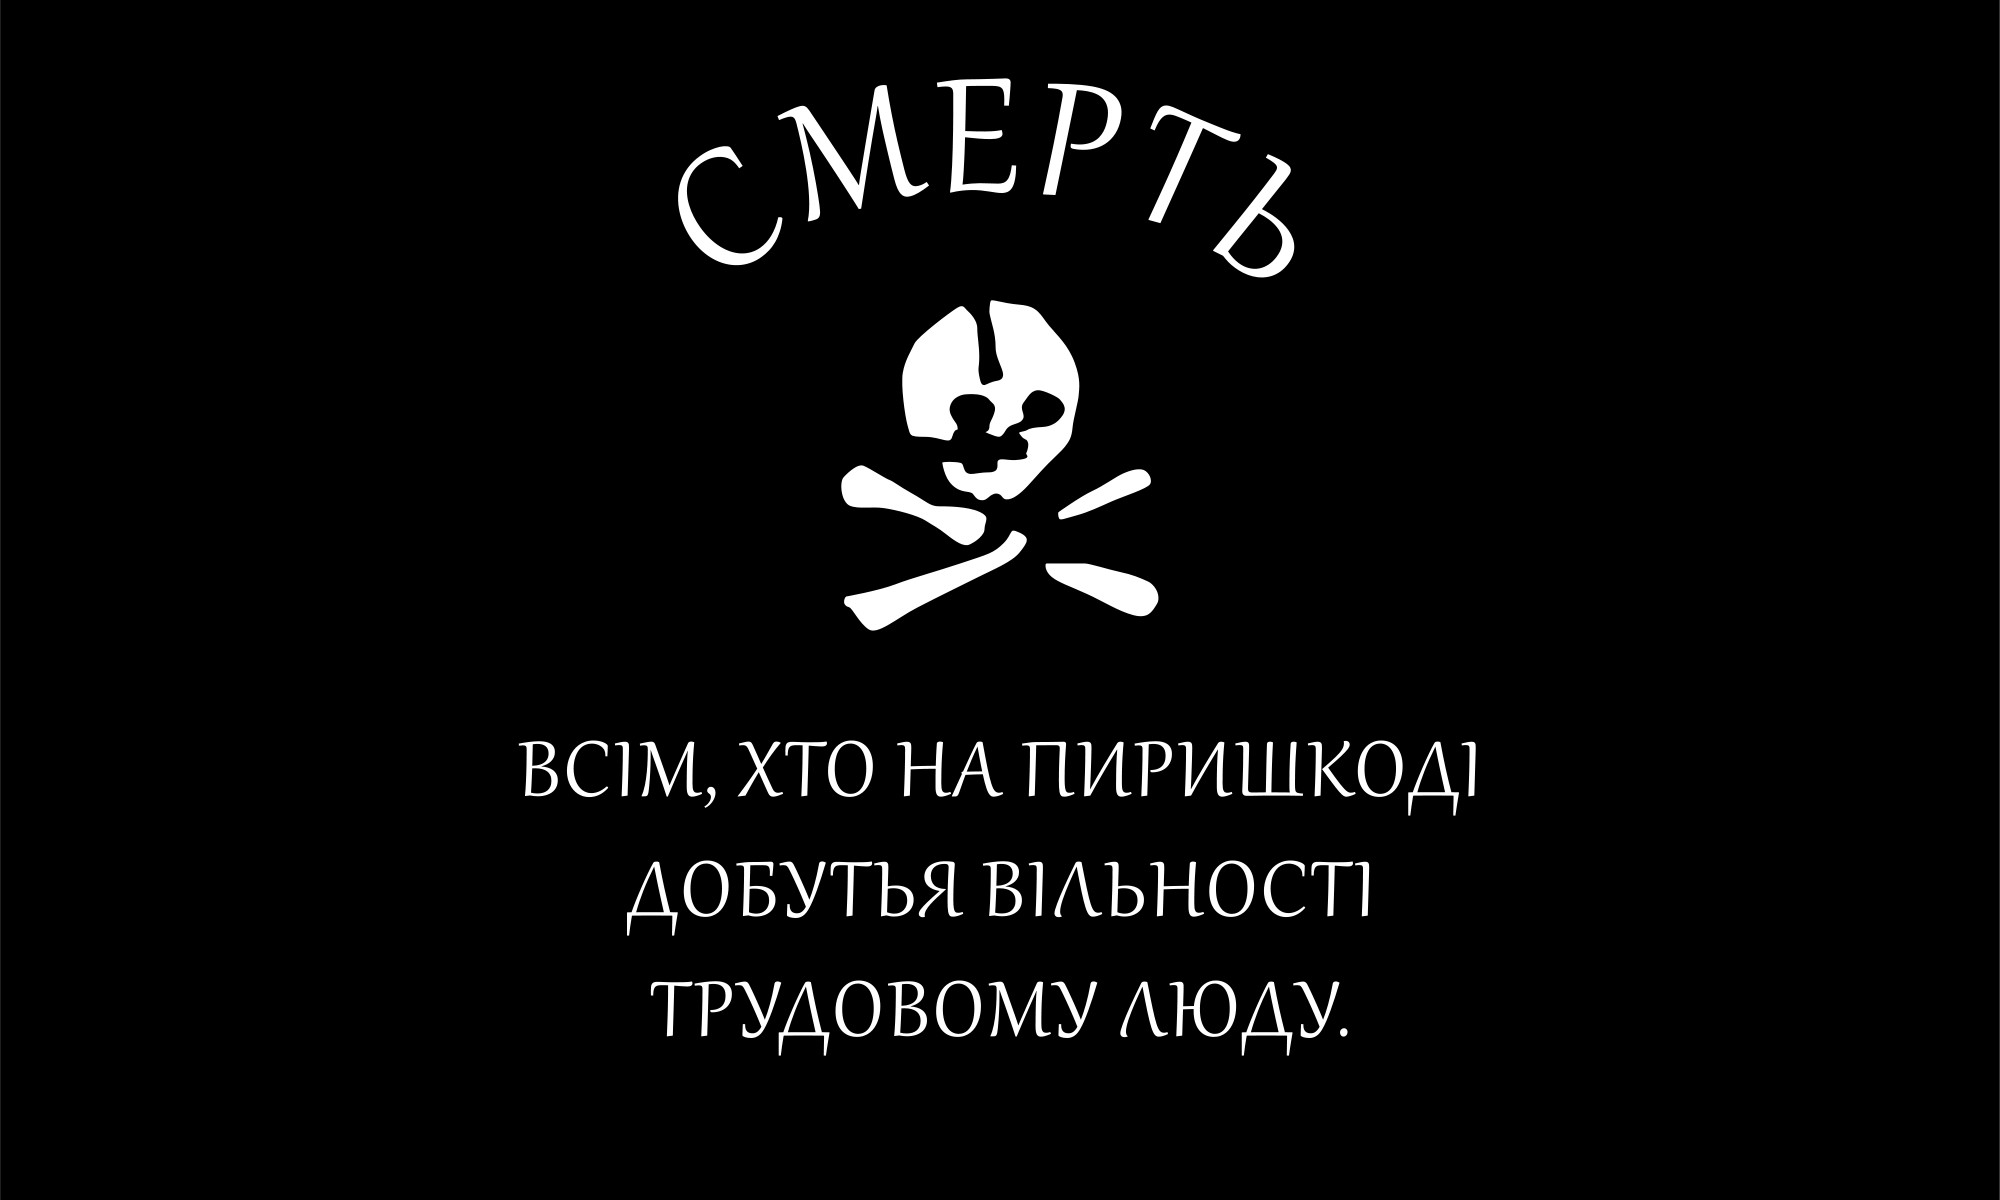 2000x1200 The flag of the anarchist Black Army during the Russian Civil War. It says,  "Death to all who stand in the way of freedom for working people."